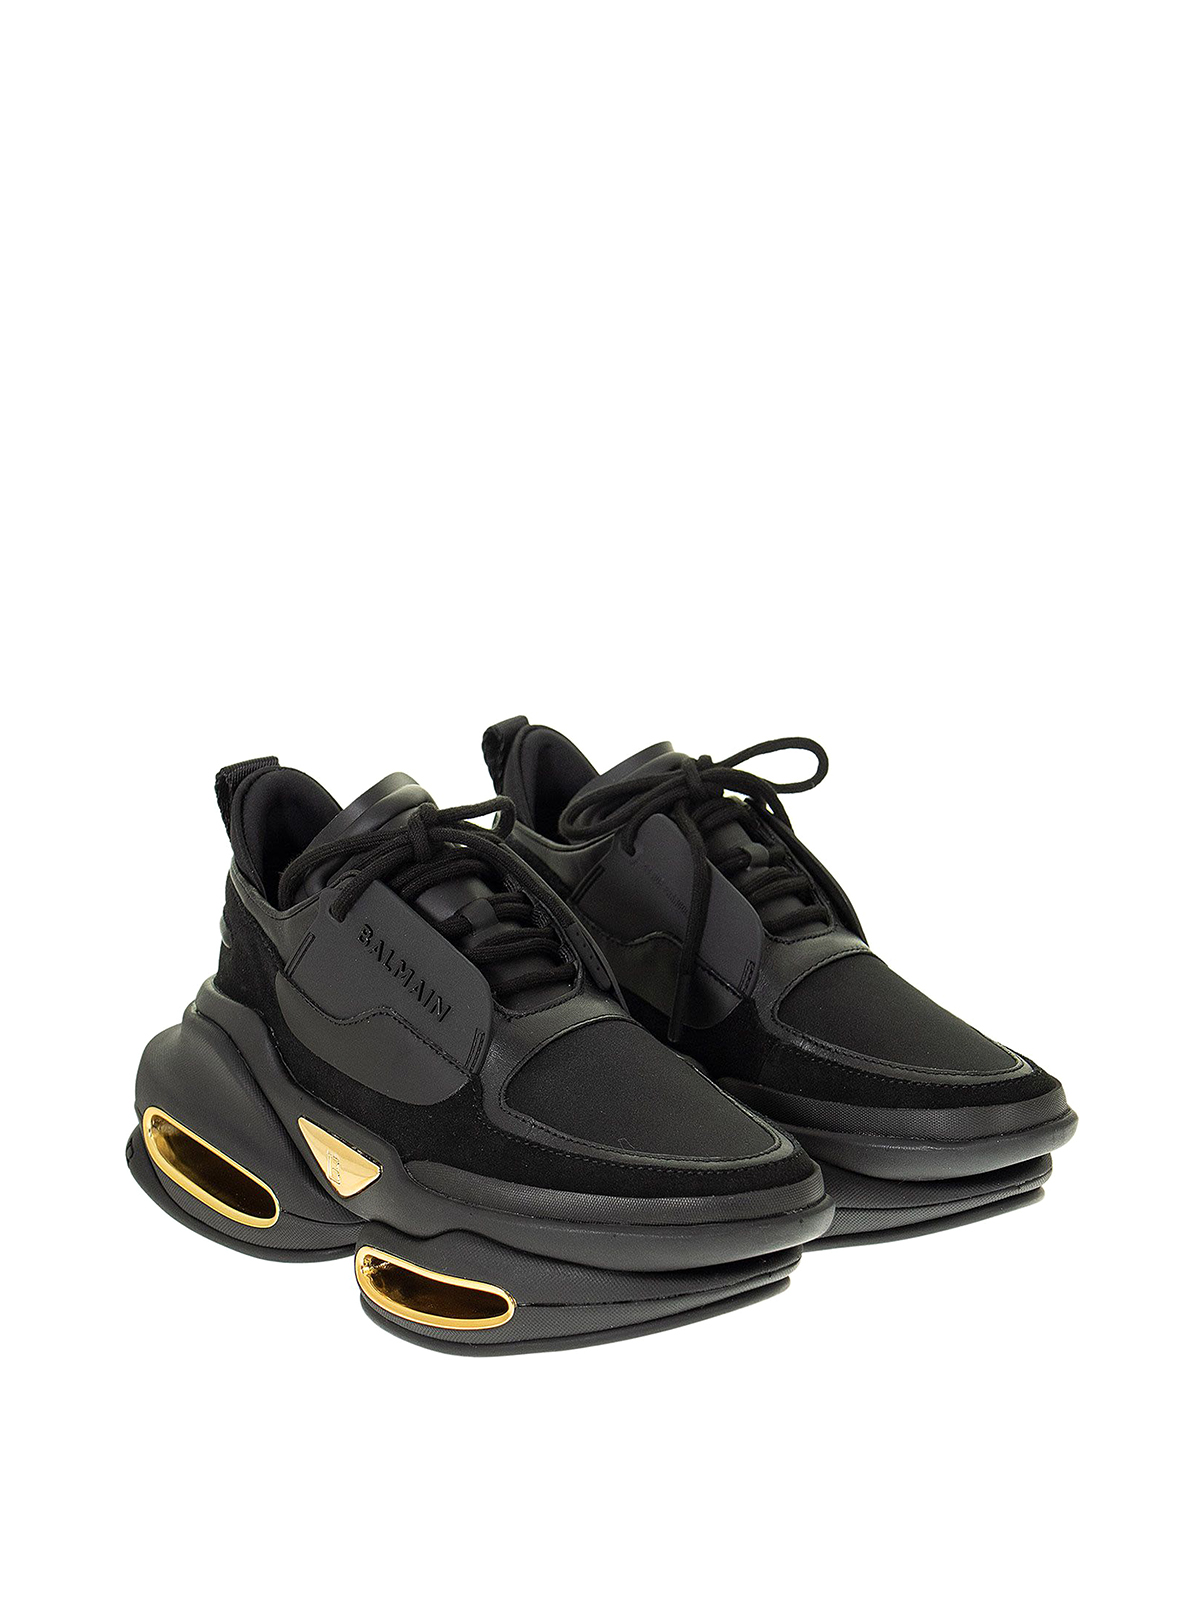 Trainers Balmain - Bbold black suede and leather sneakers - WN1VI541LSLD0PA